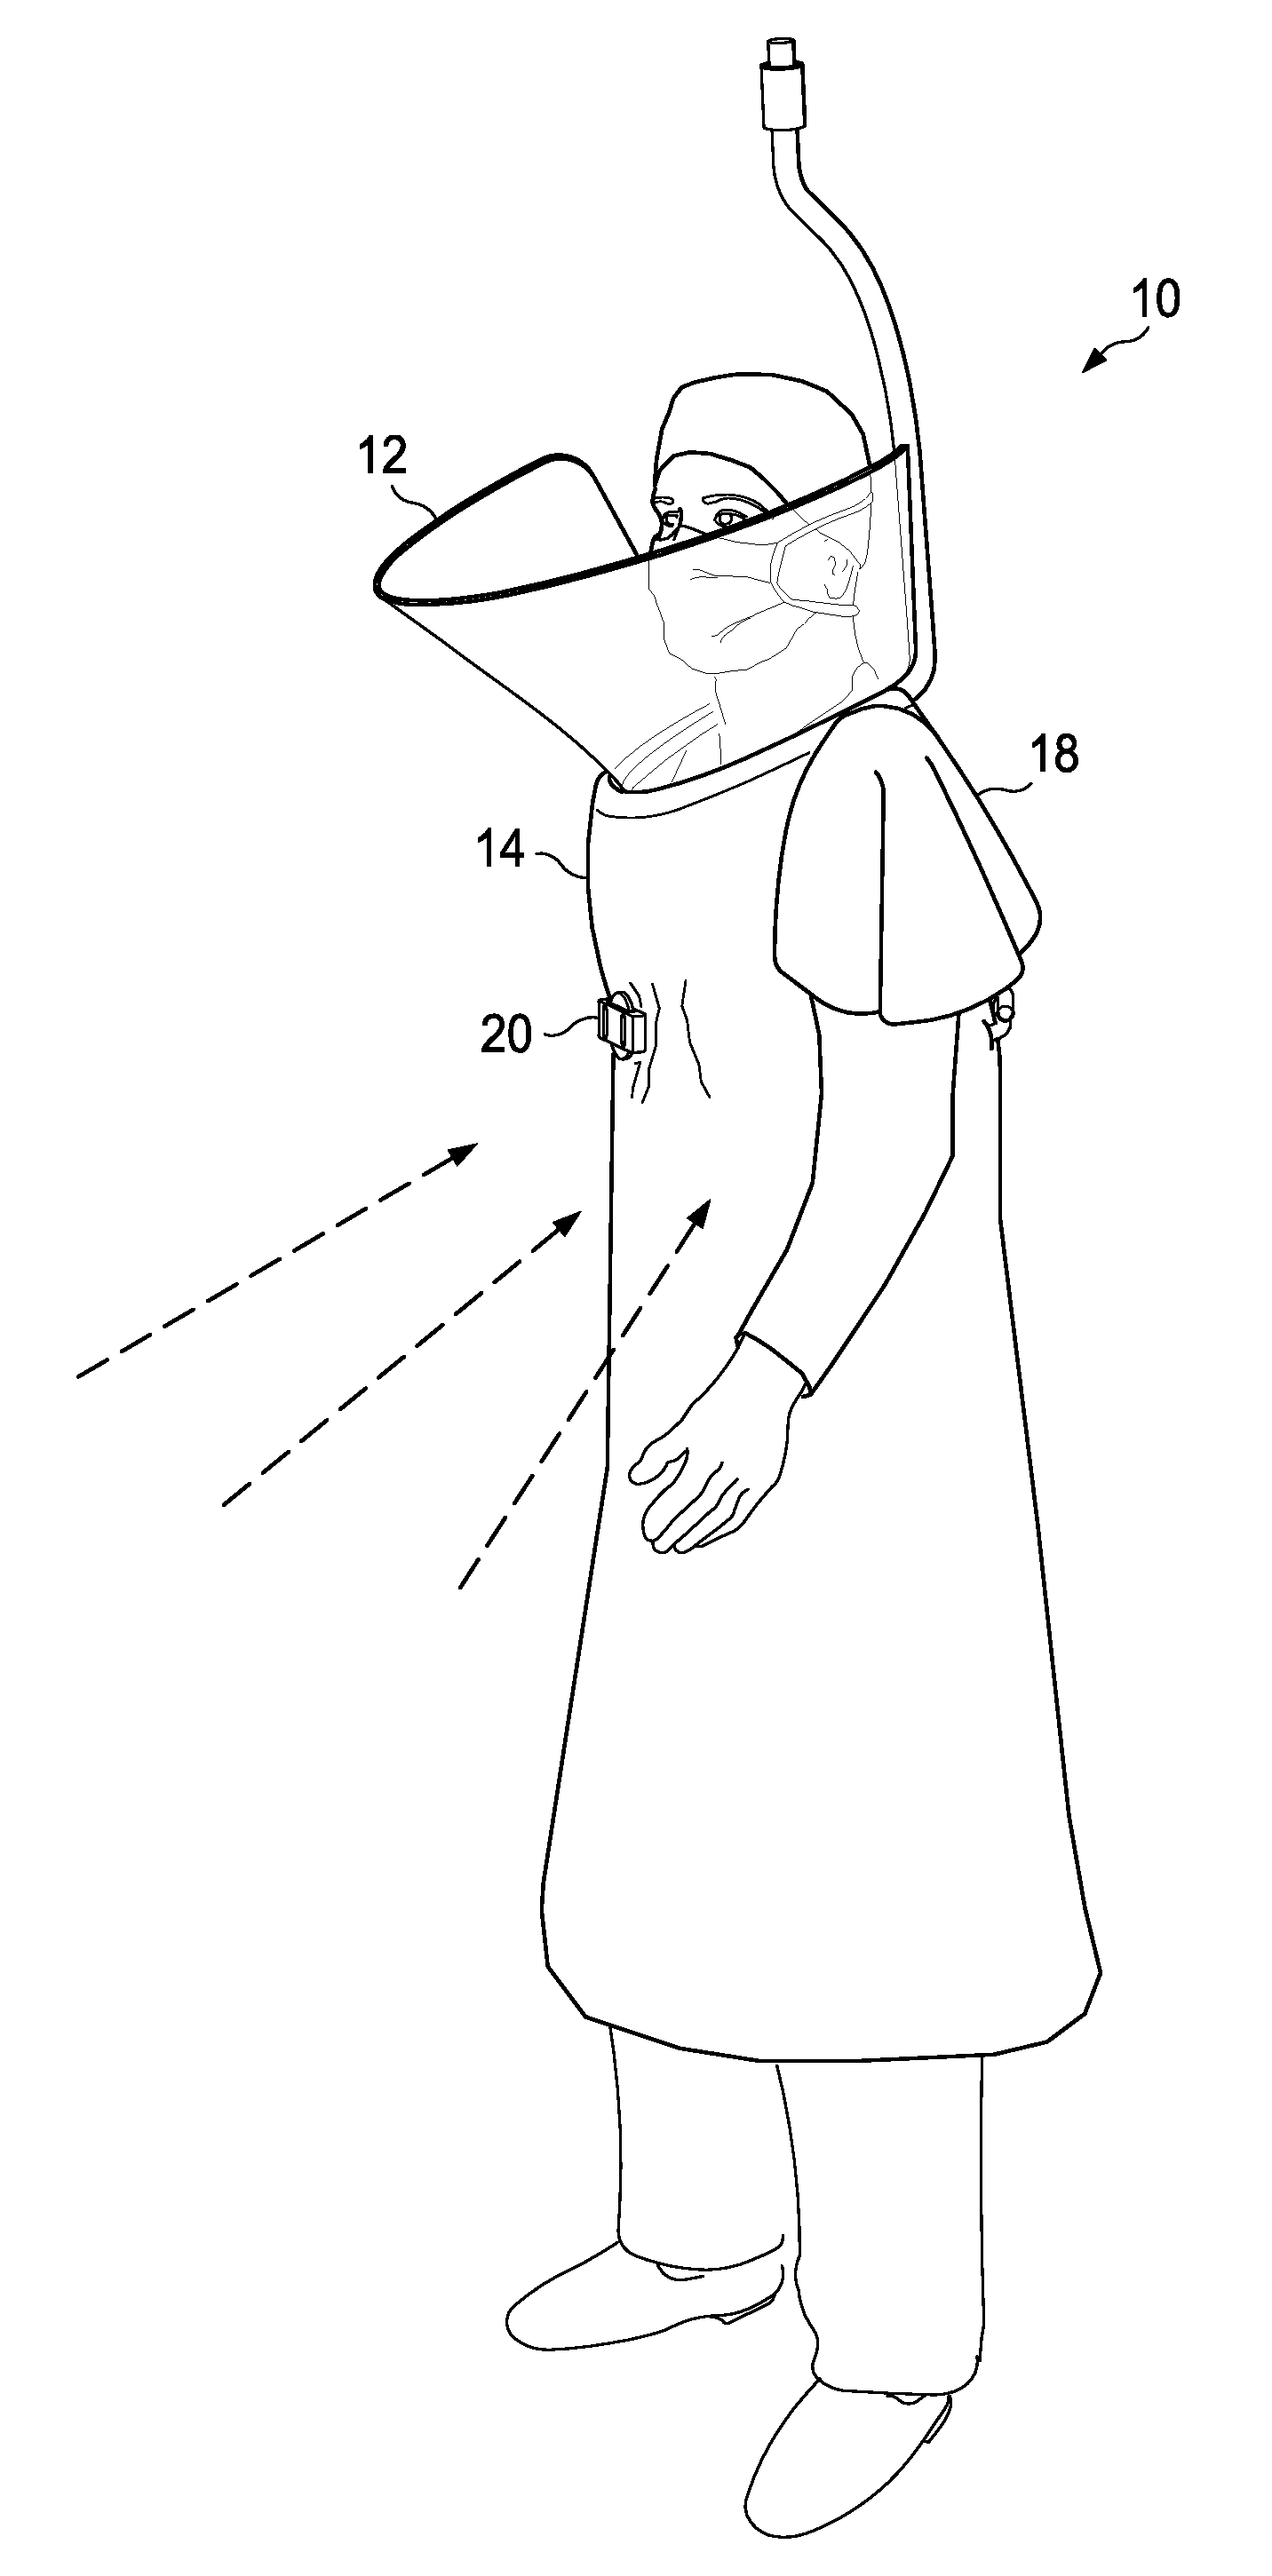 System and Method For Providing a Suspended Personal Radiation Protection System